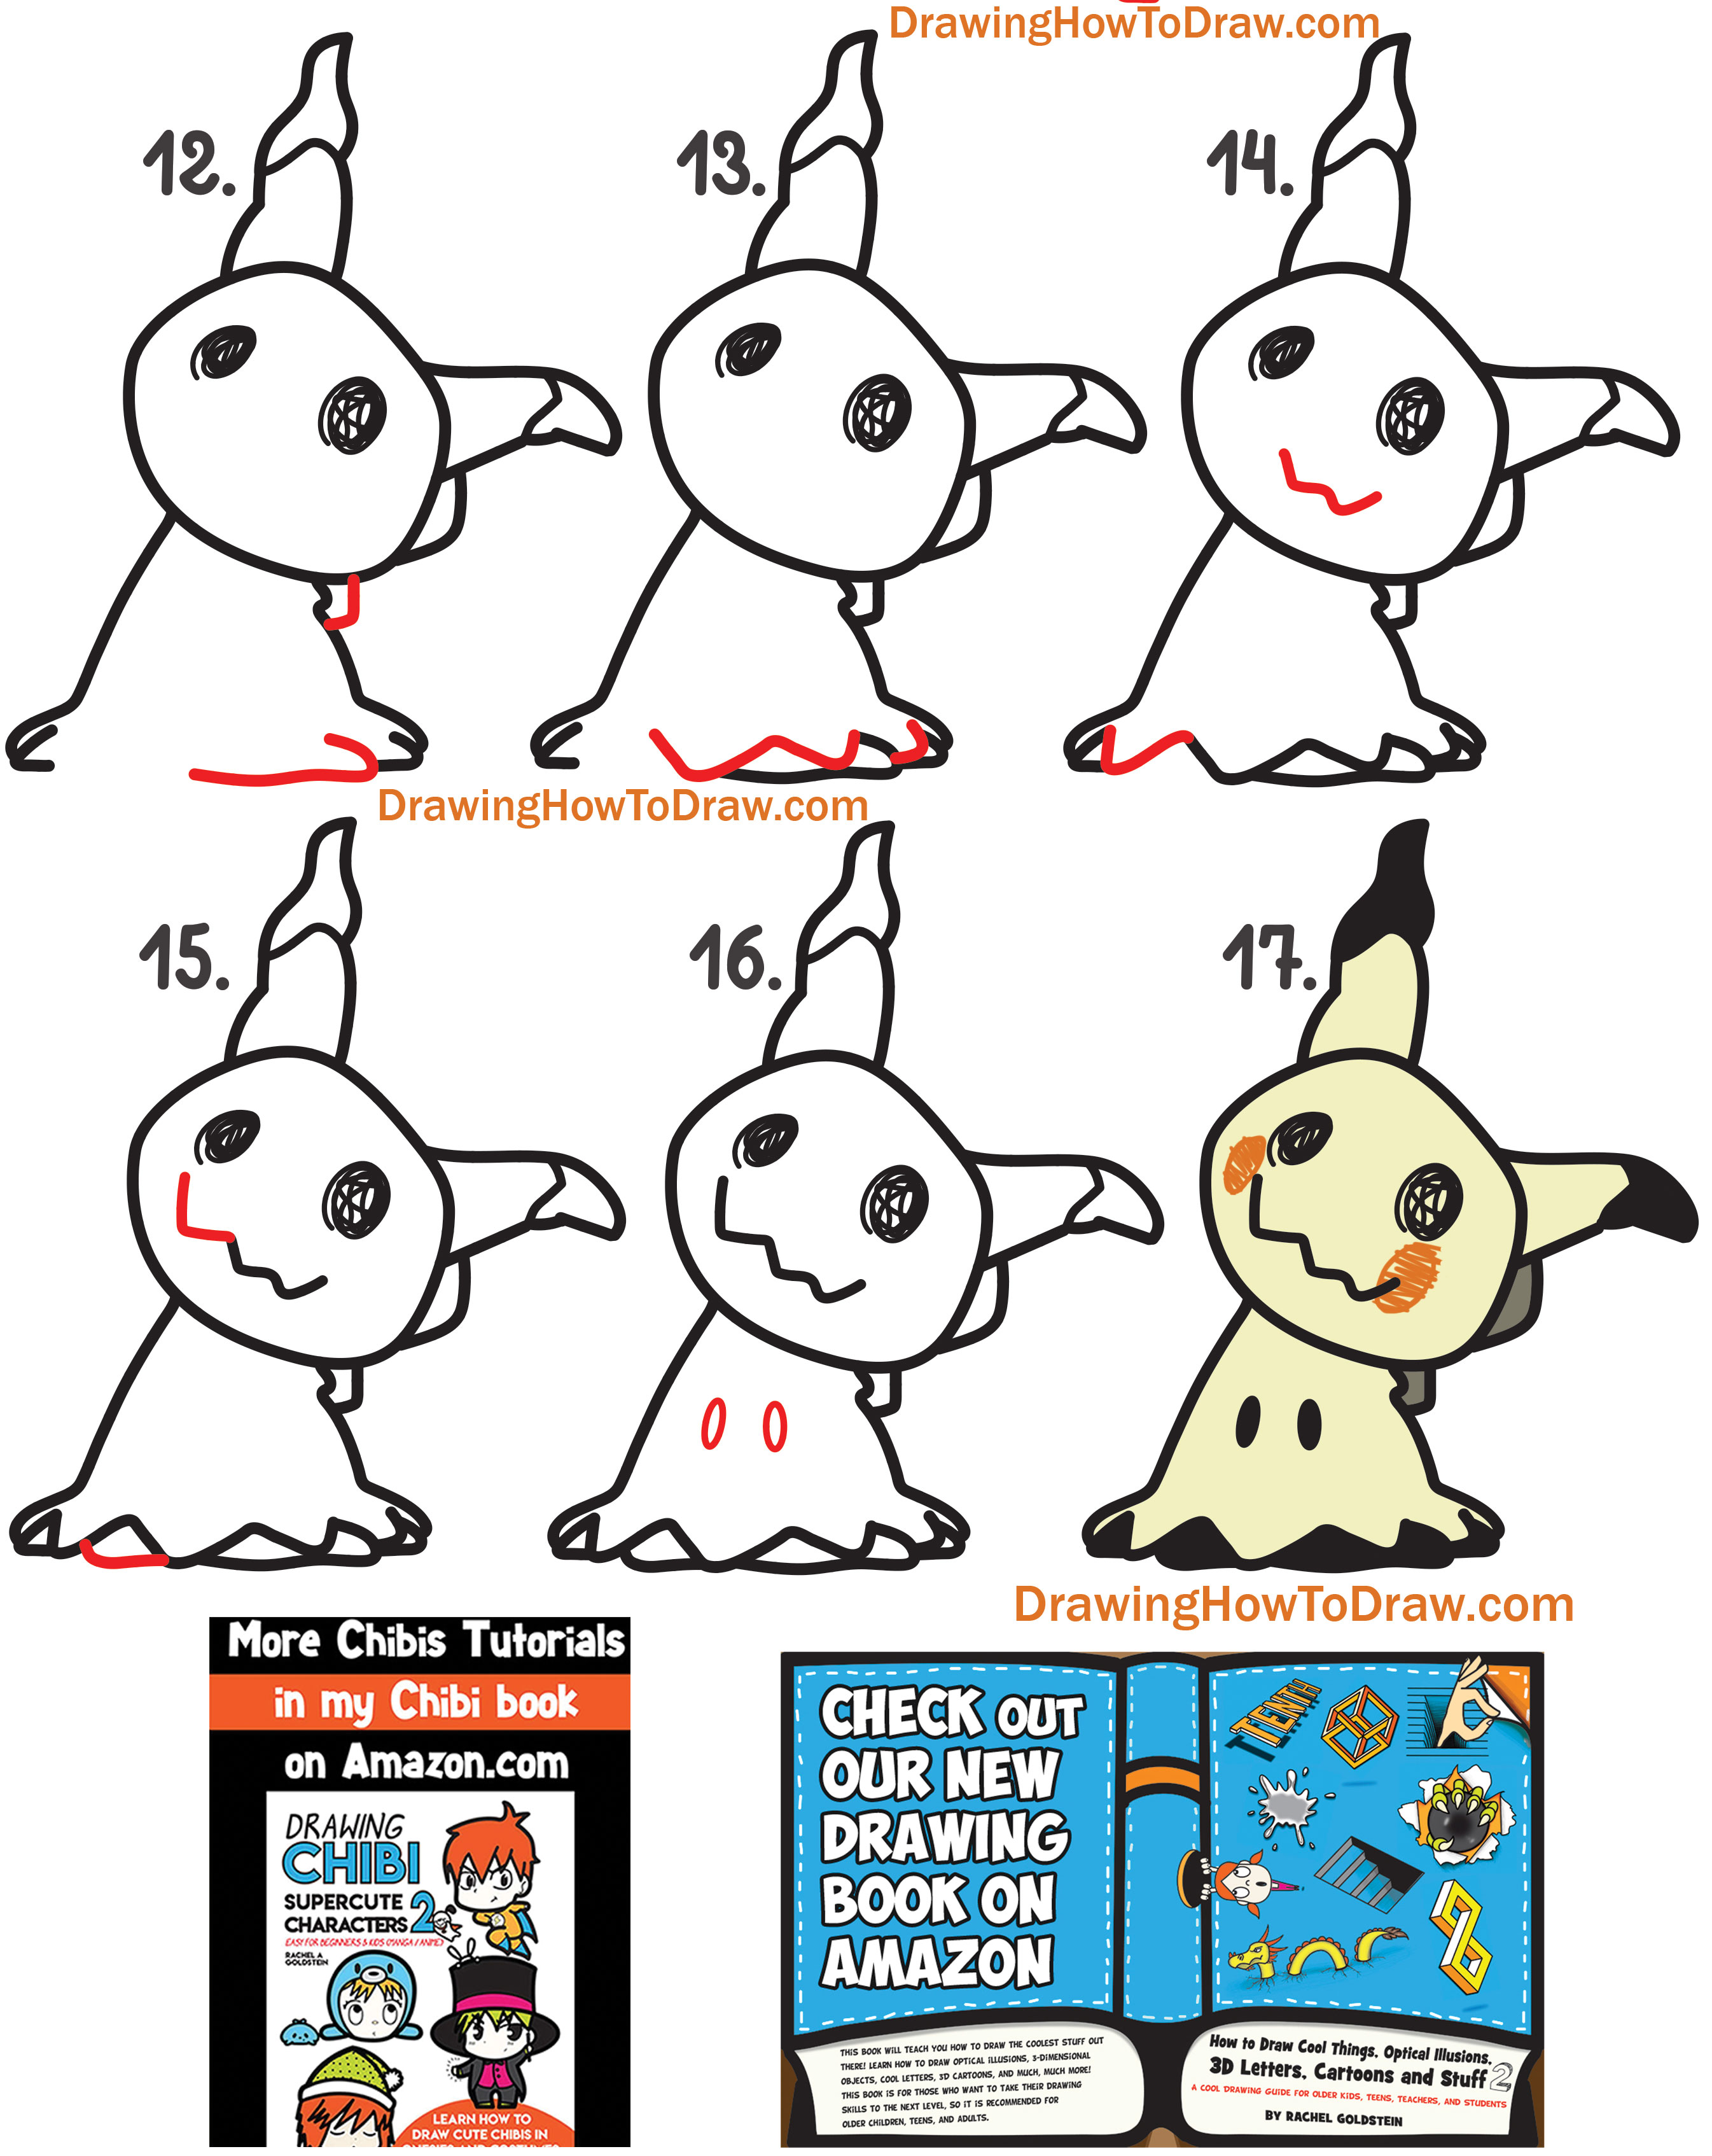 How to Draw Mimikyu from Pokemon Easy Step by Step Drawing Lesson for